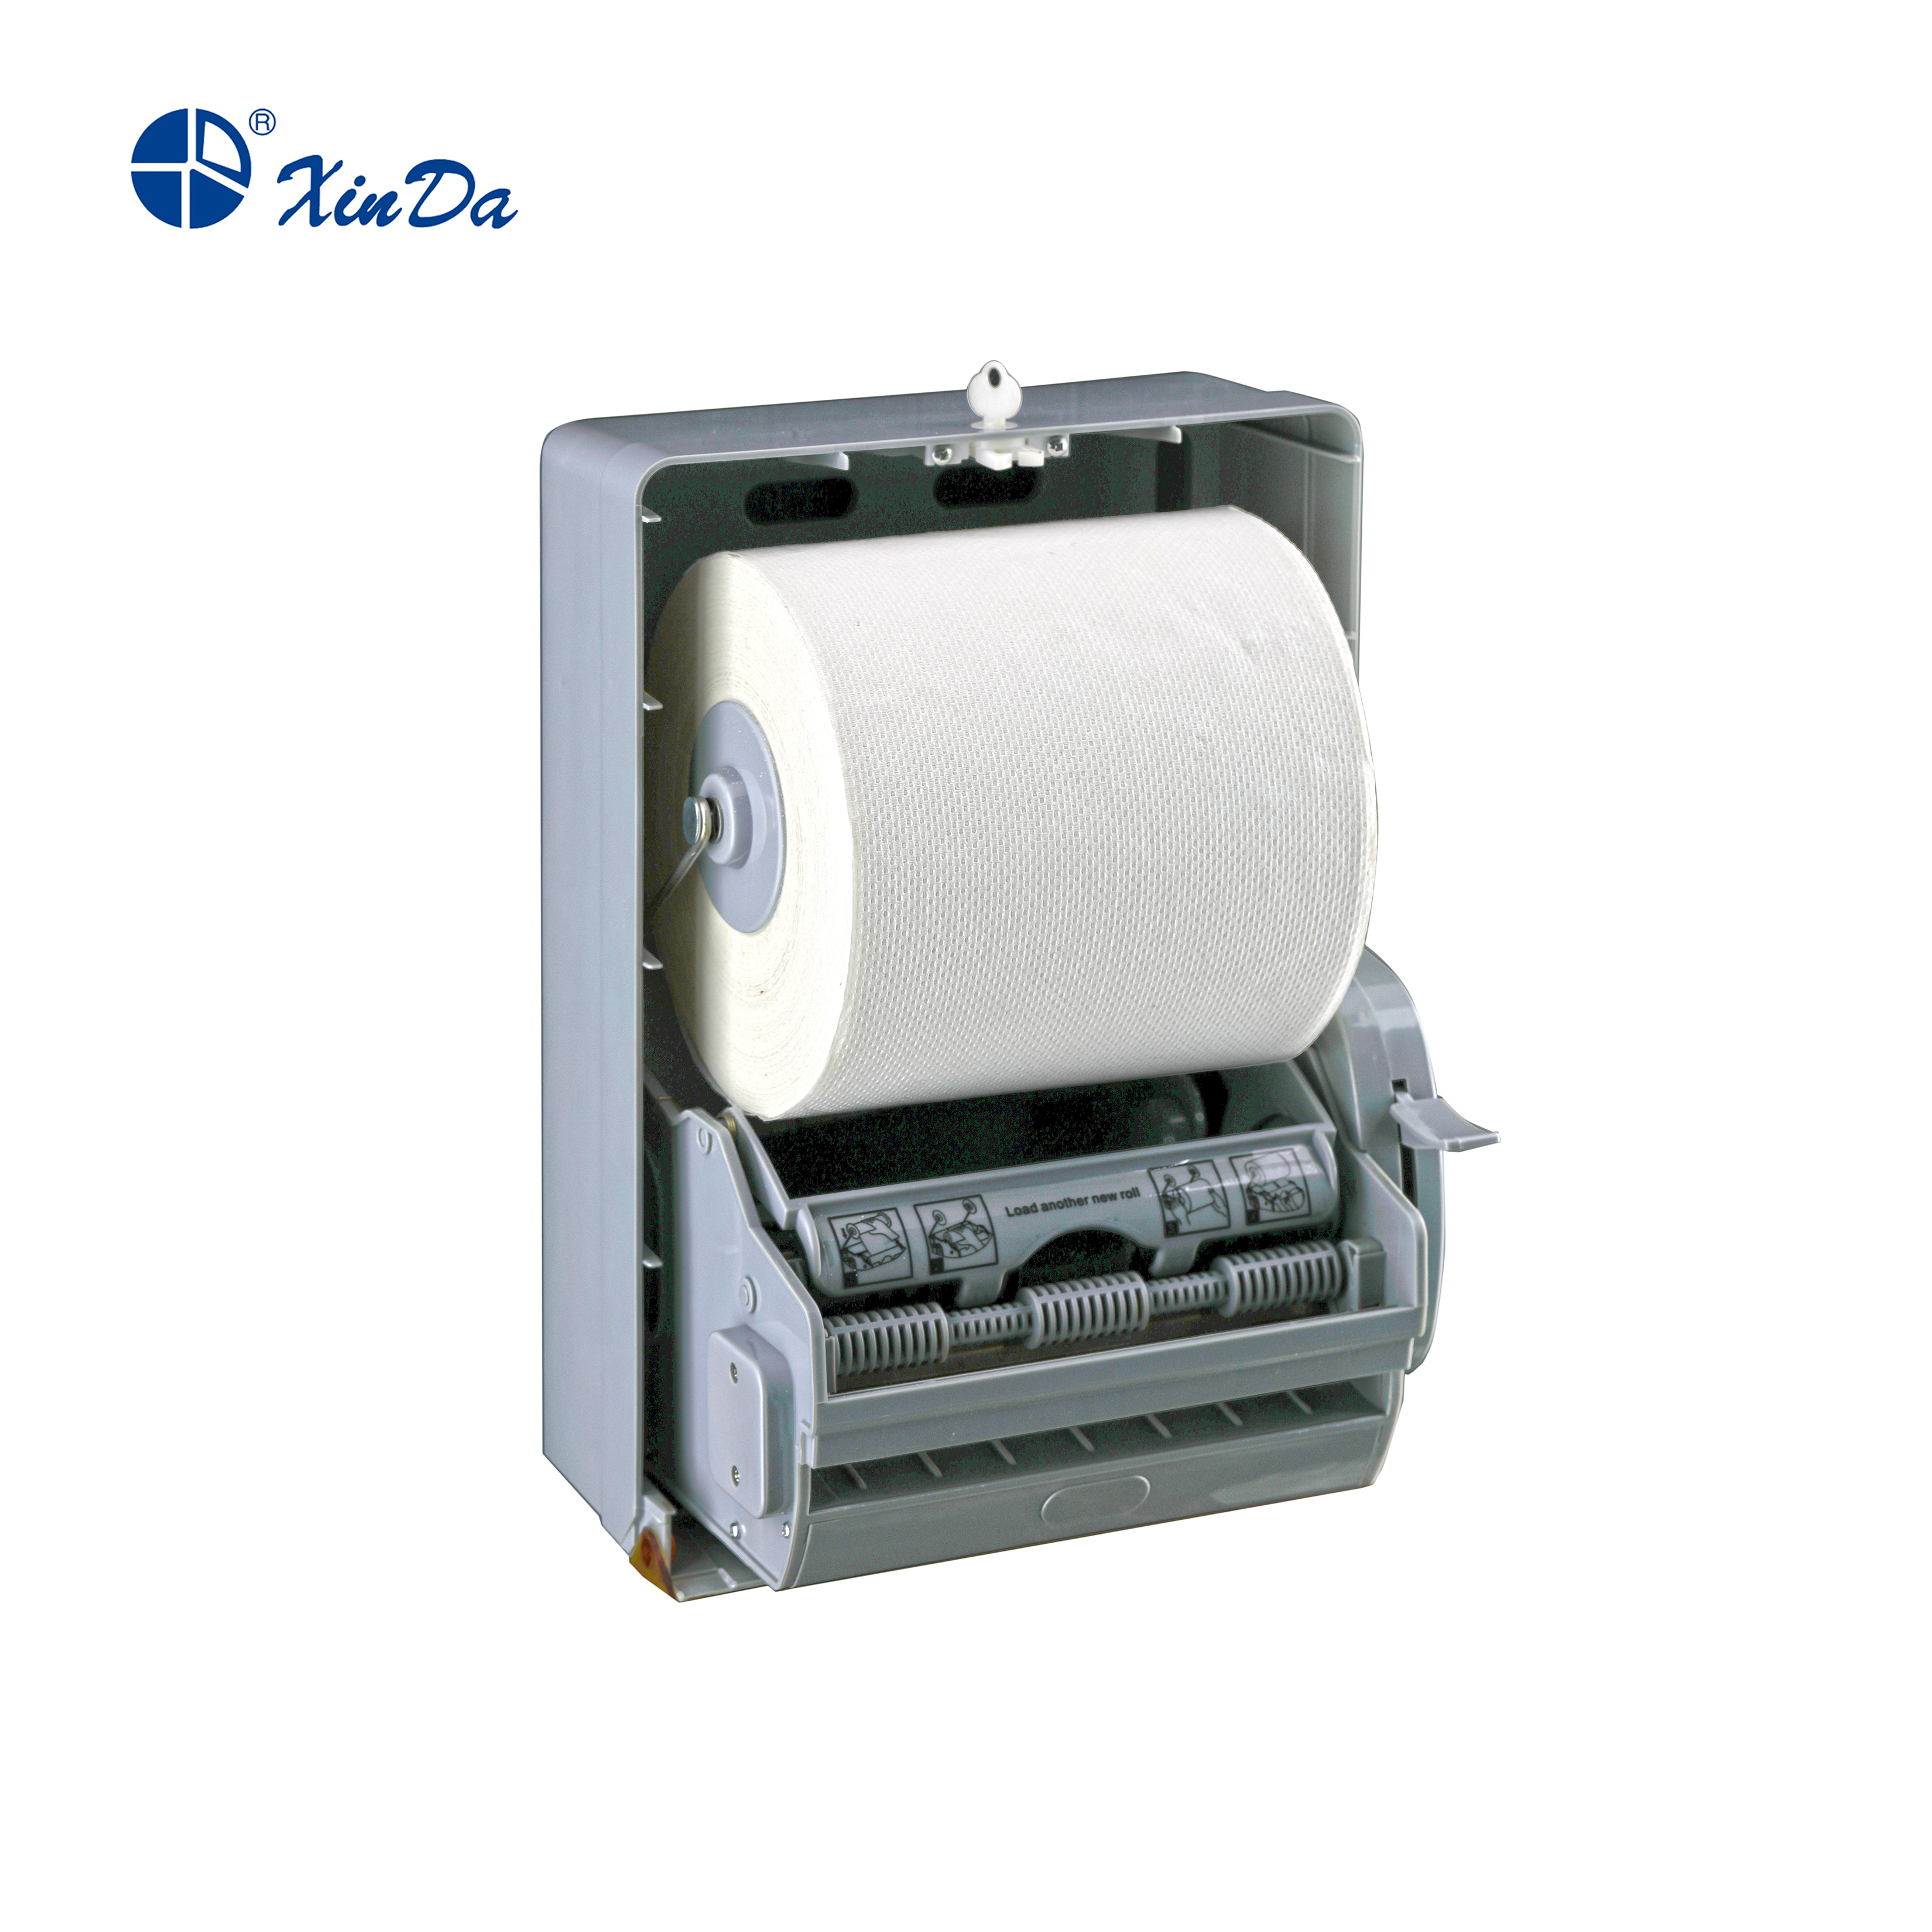 Choosing the Right Style of Roll Tissue Holder